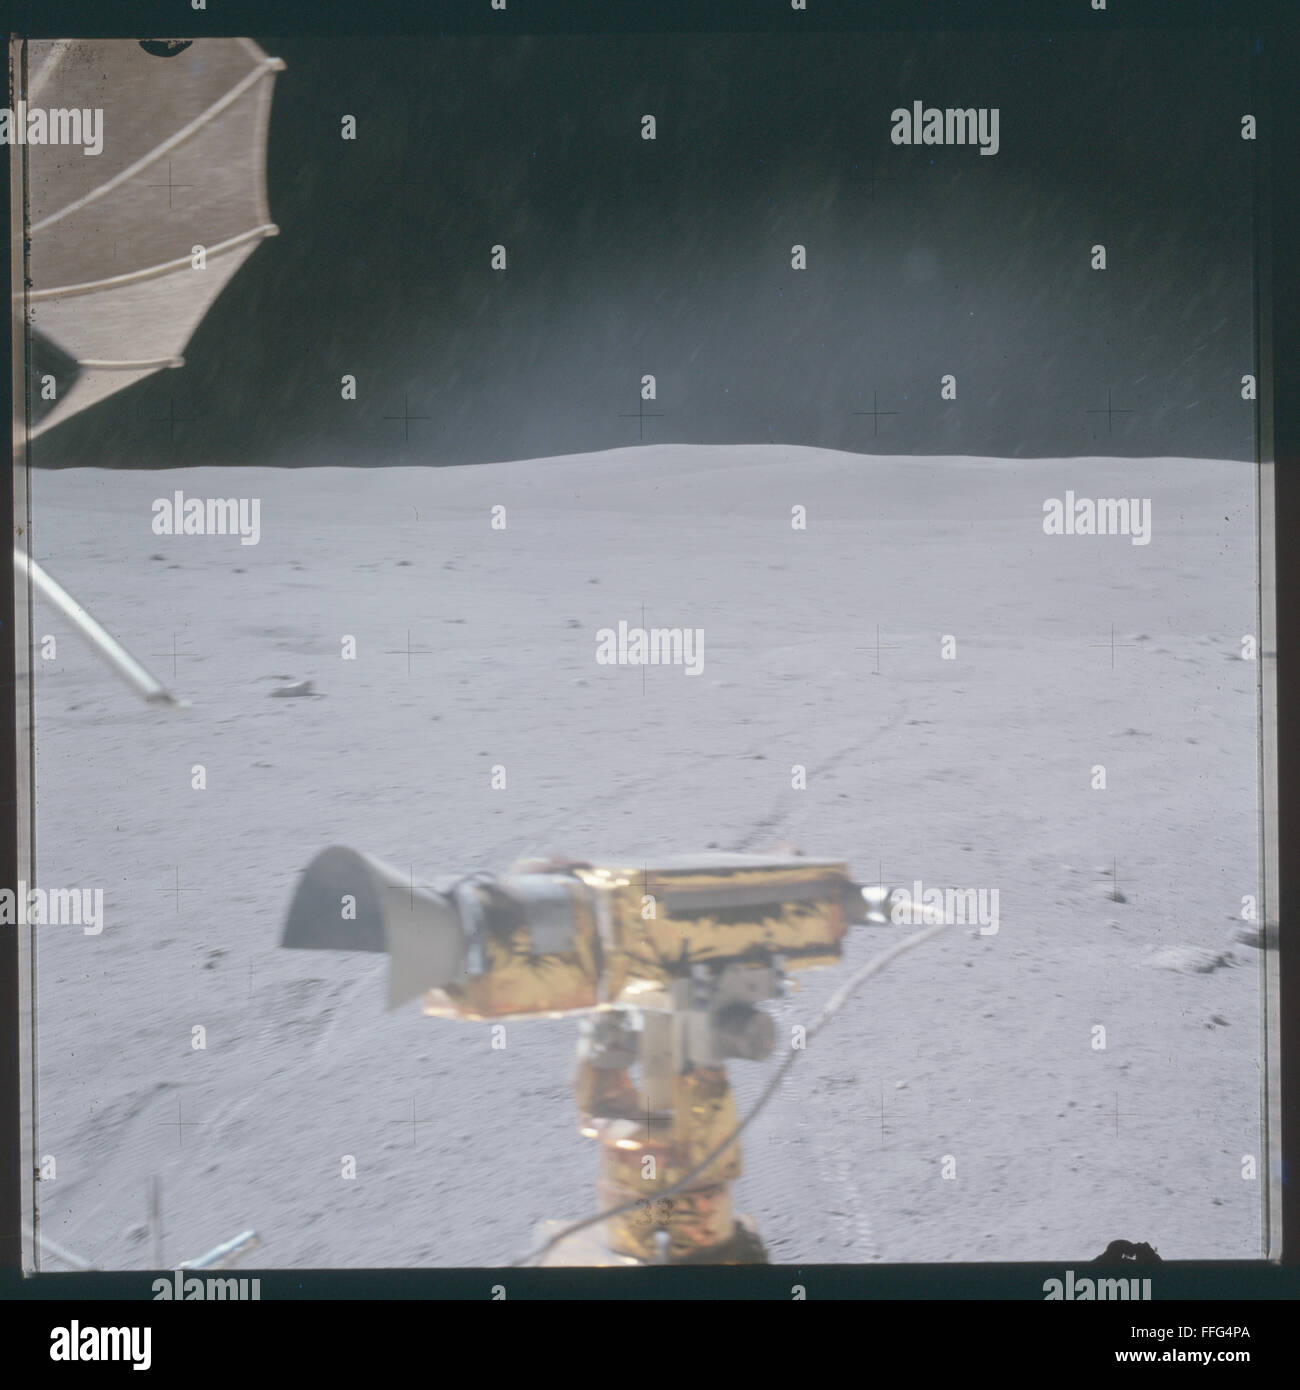 Apollo 16 untouched photographic archive, this is the complete unedited collection from the Apollo Mission Stock Photo